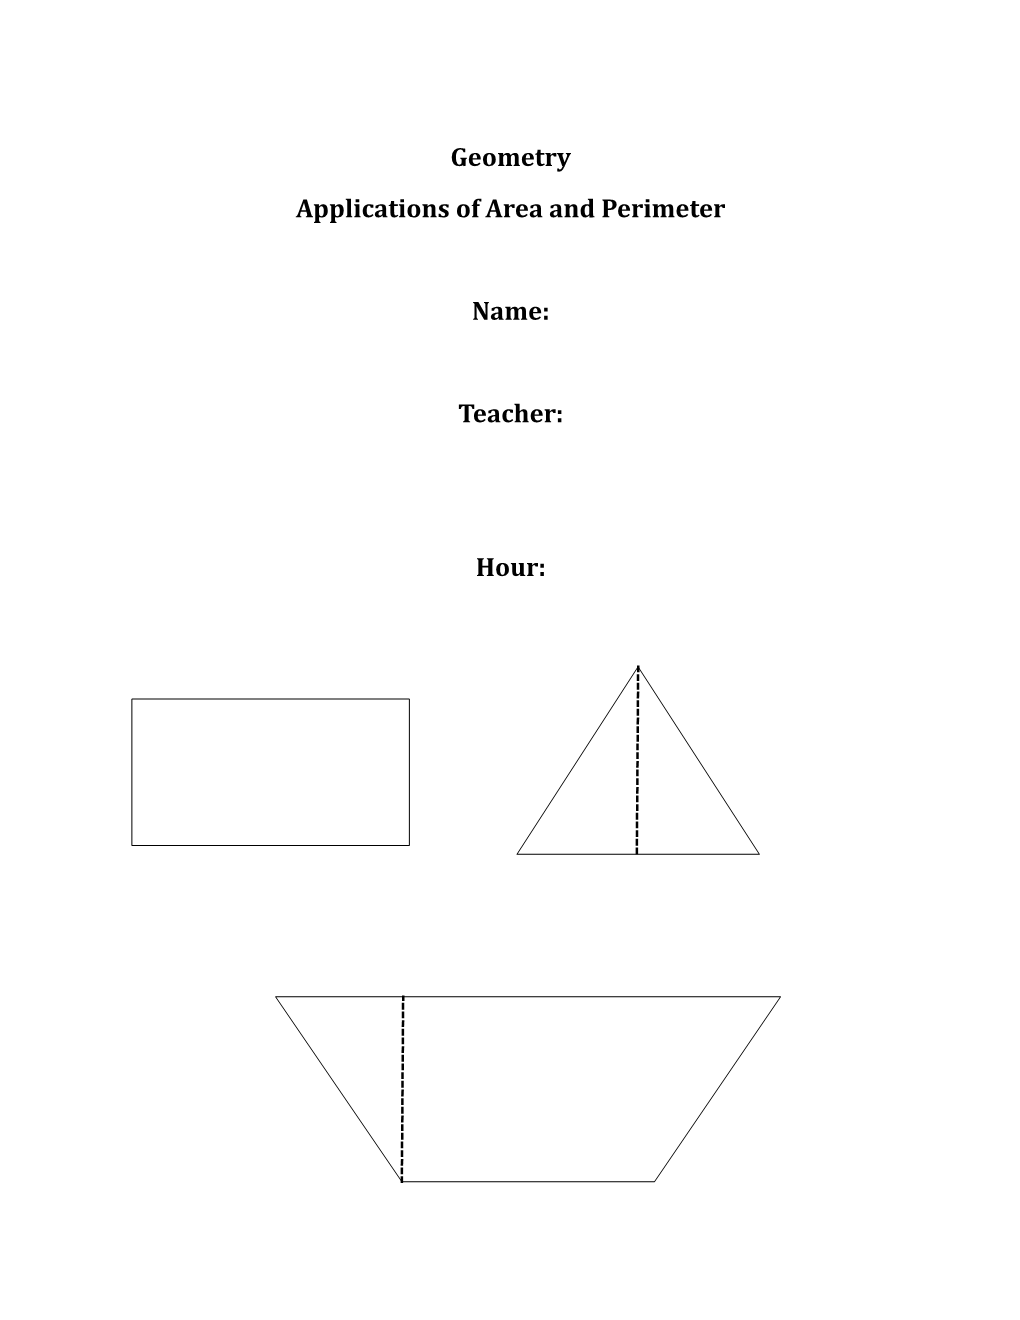 Applications of Area and Perimeter